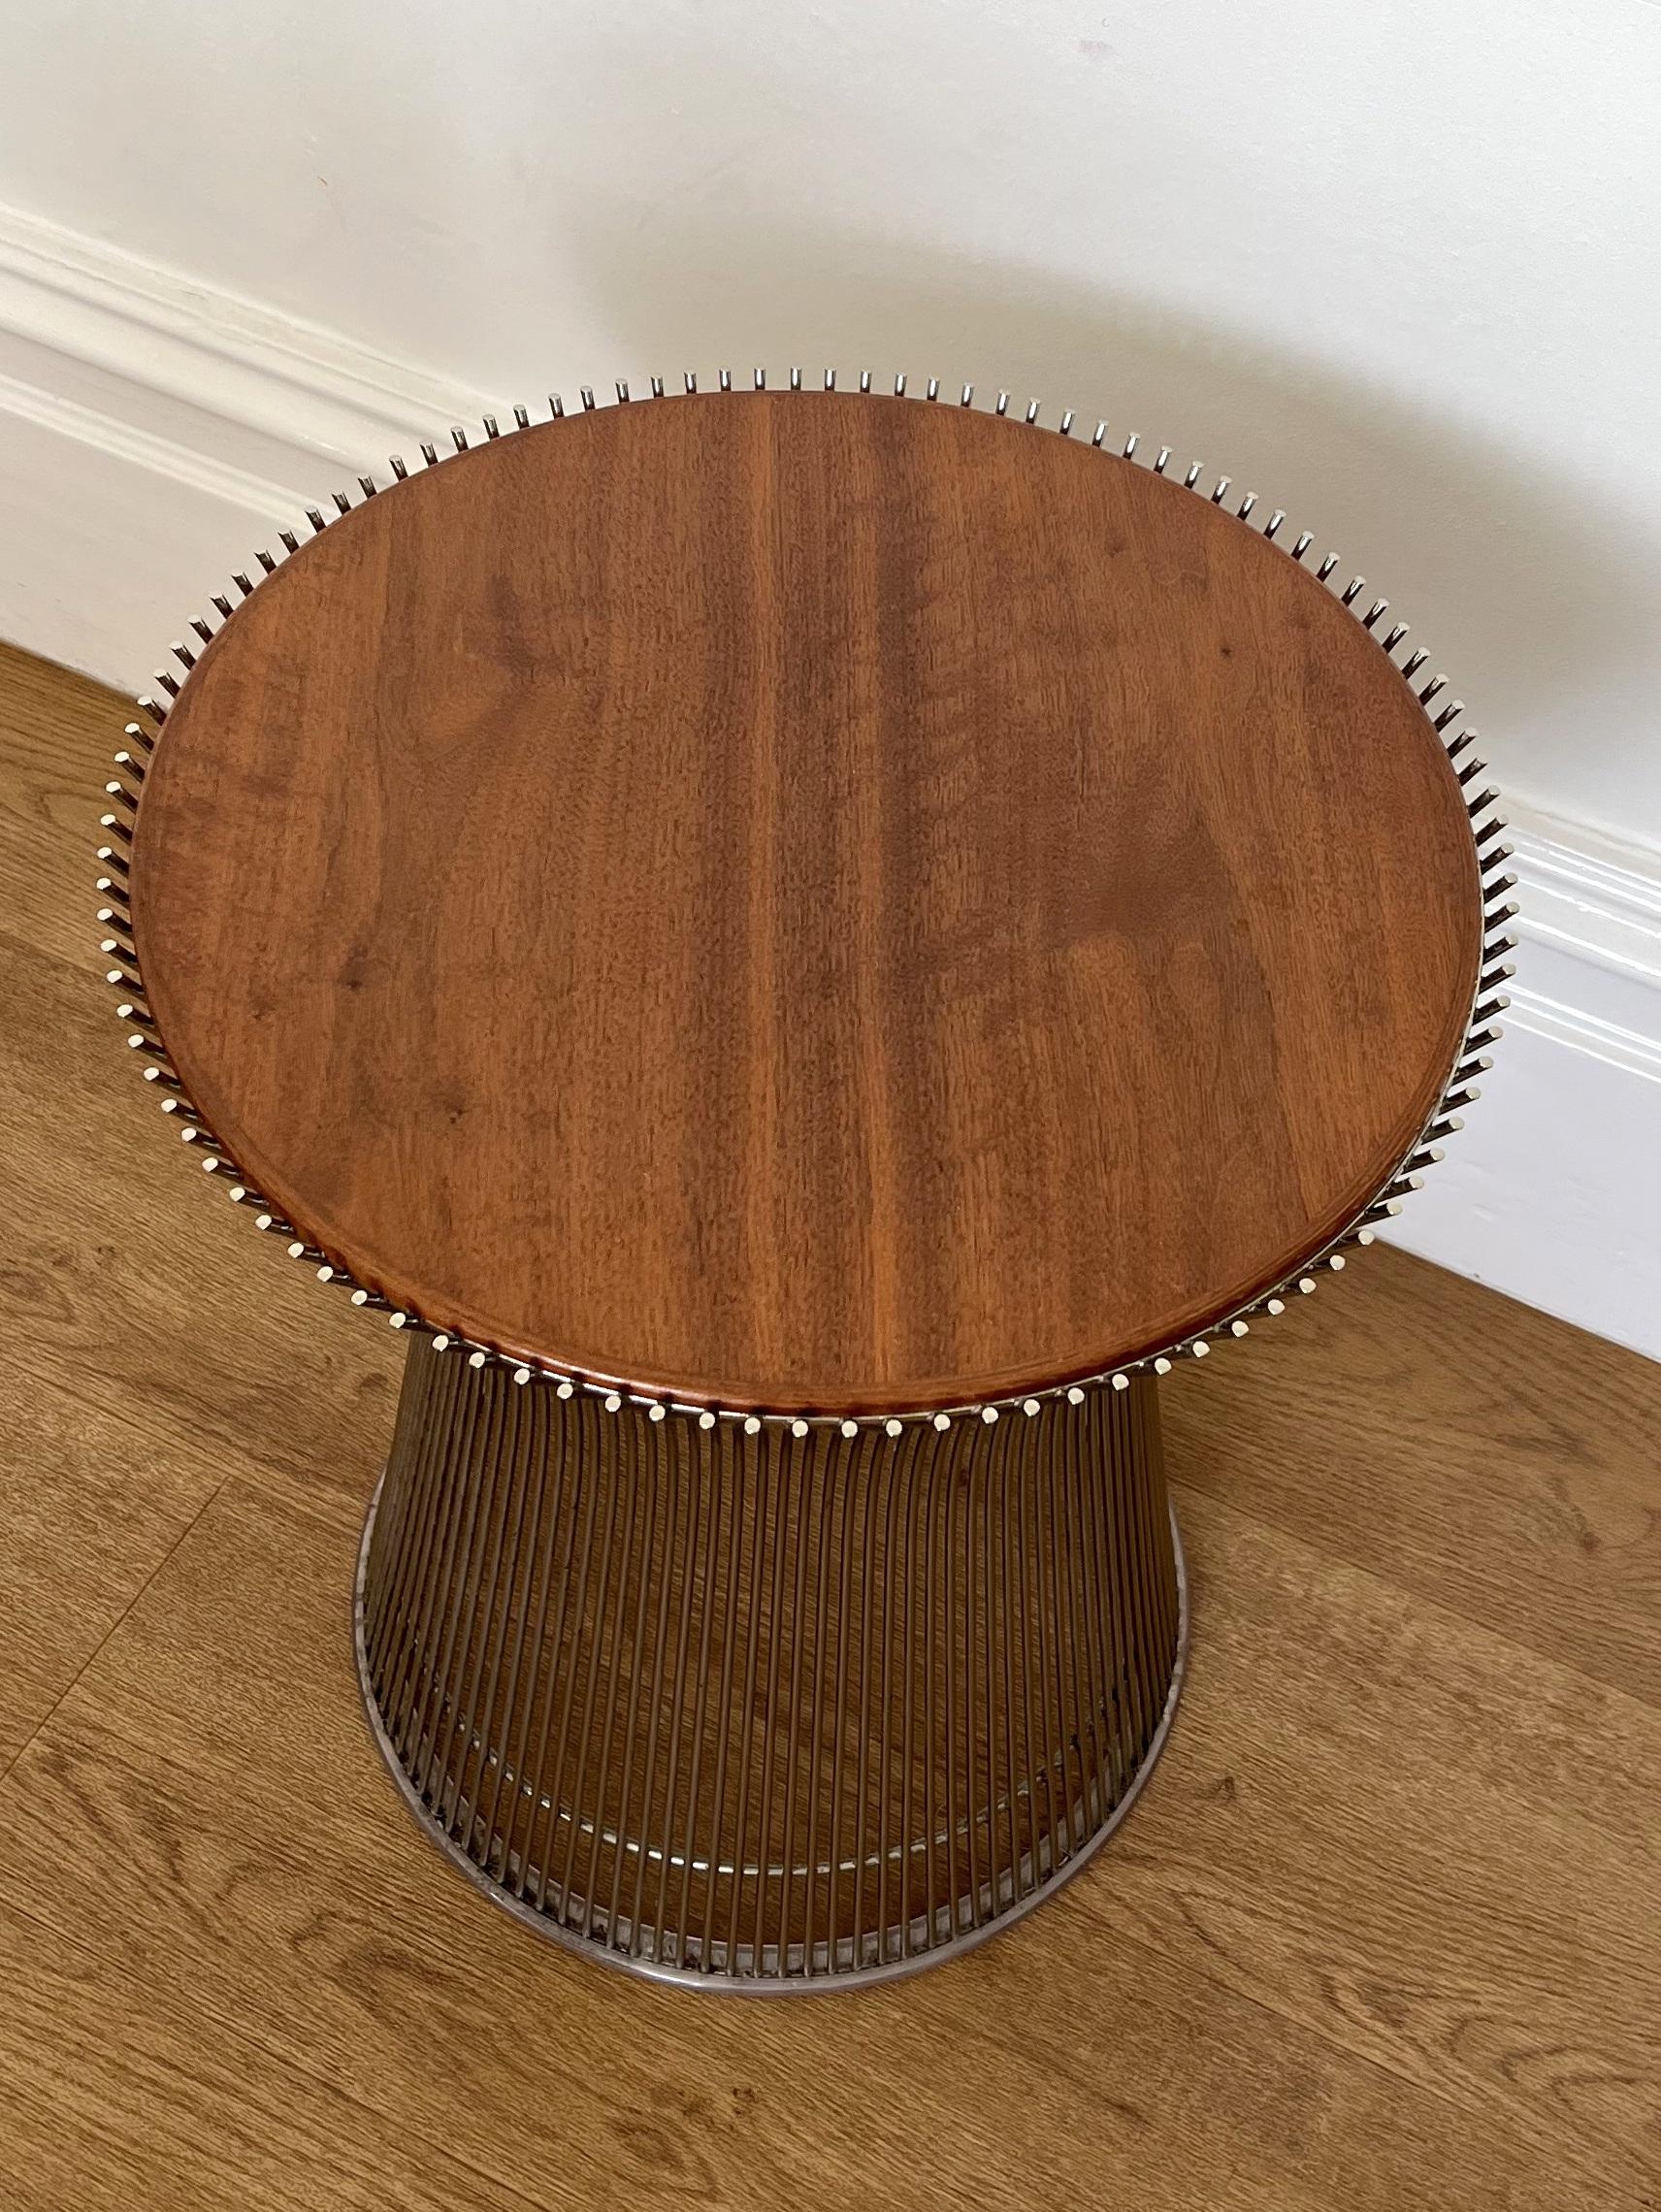 Warren Platner nickel finished wire side table with weighted, walnut veneered bevel edged wooden top.

The table is in very good condition just showing very light signs of age. The top is very good and retains the Knoll Studio badge to it's